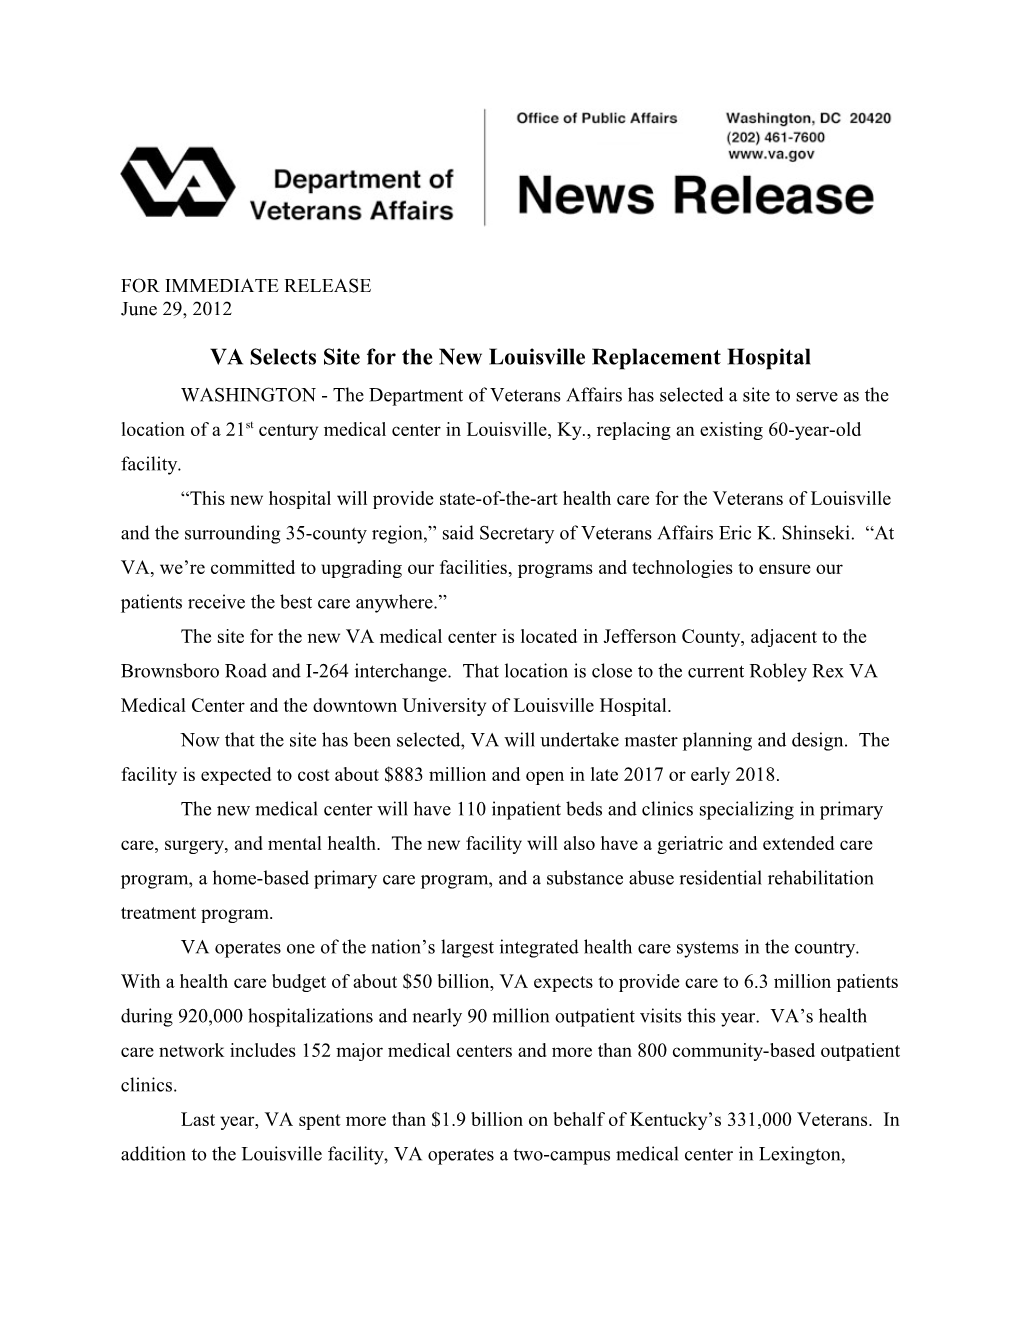 VA Selects Site for the New Louisville Replacement Hospital